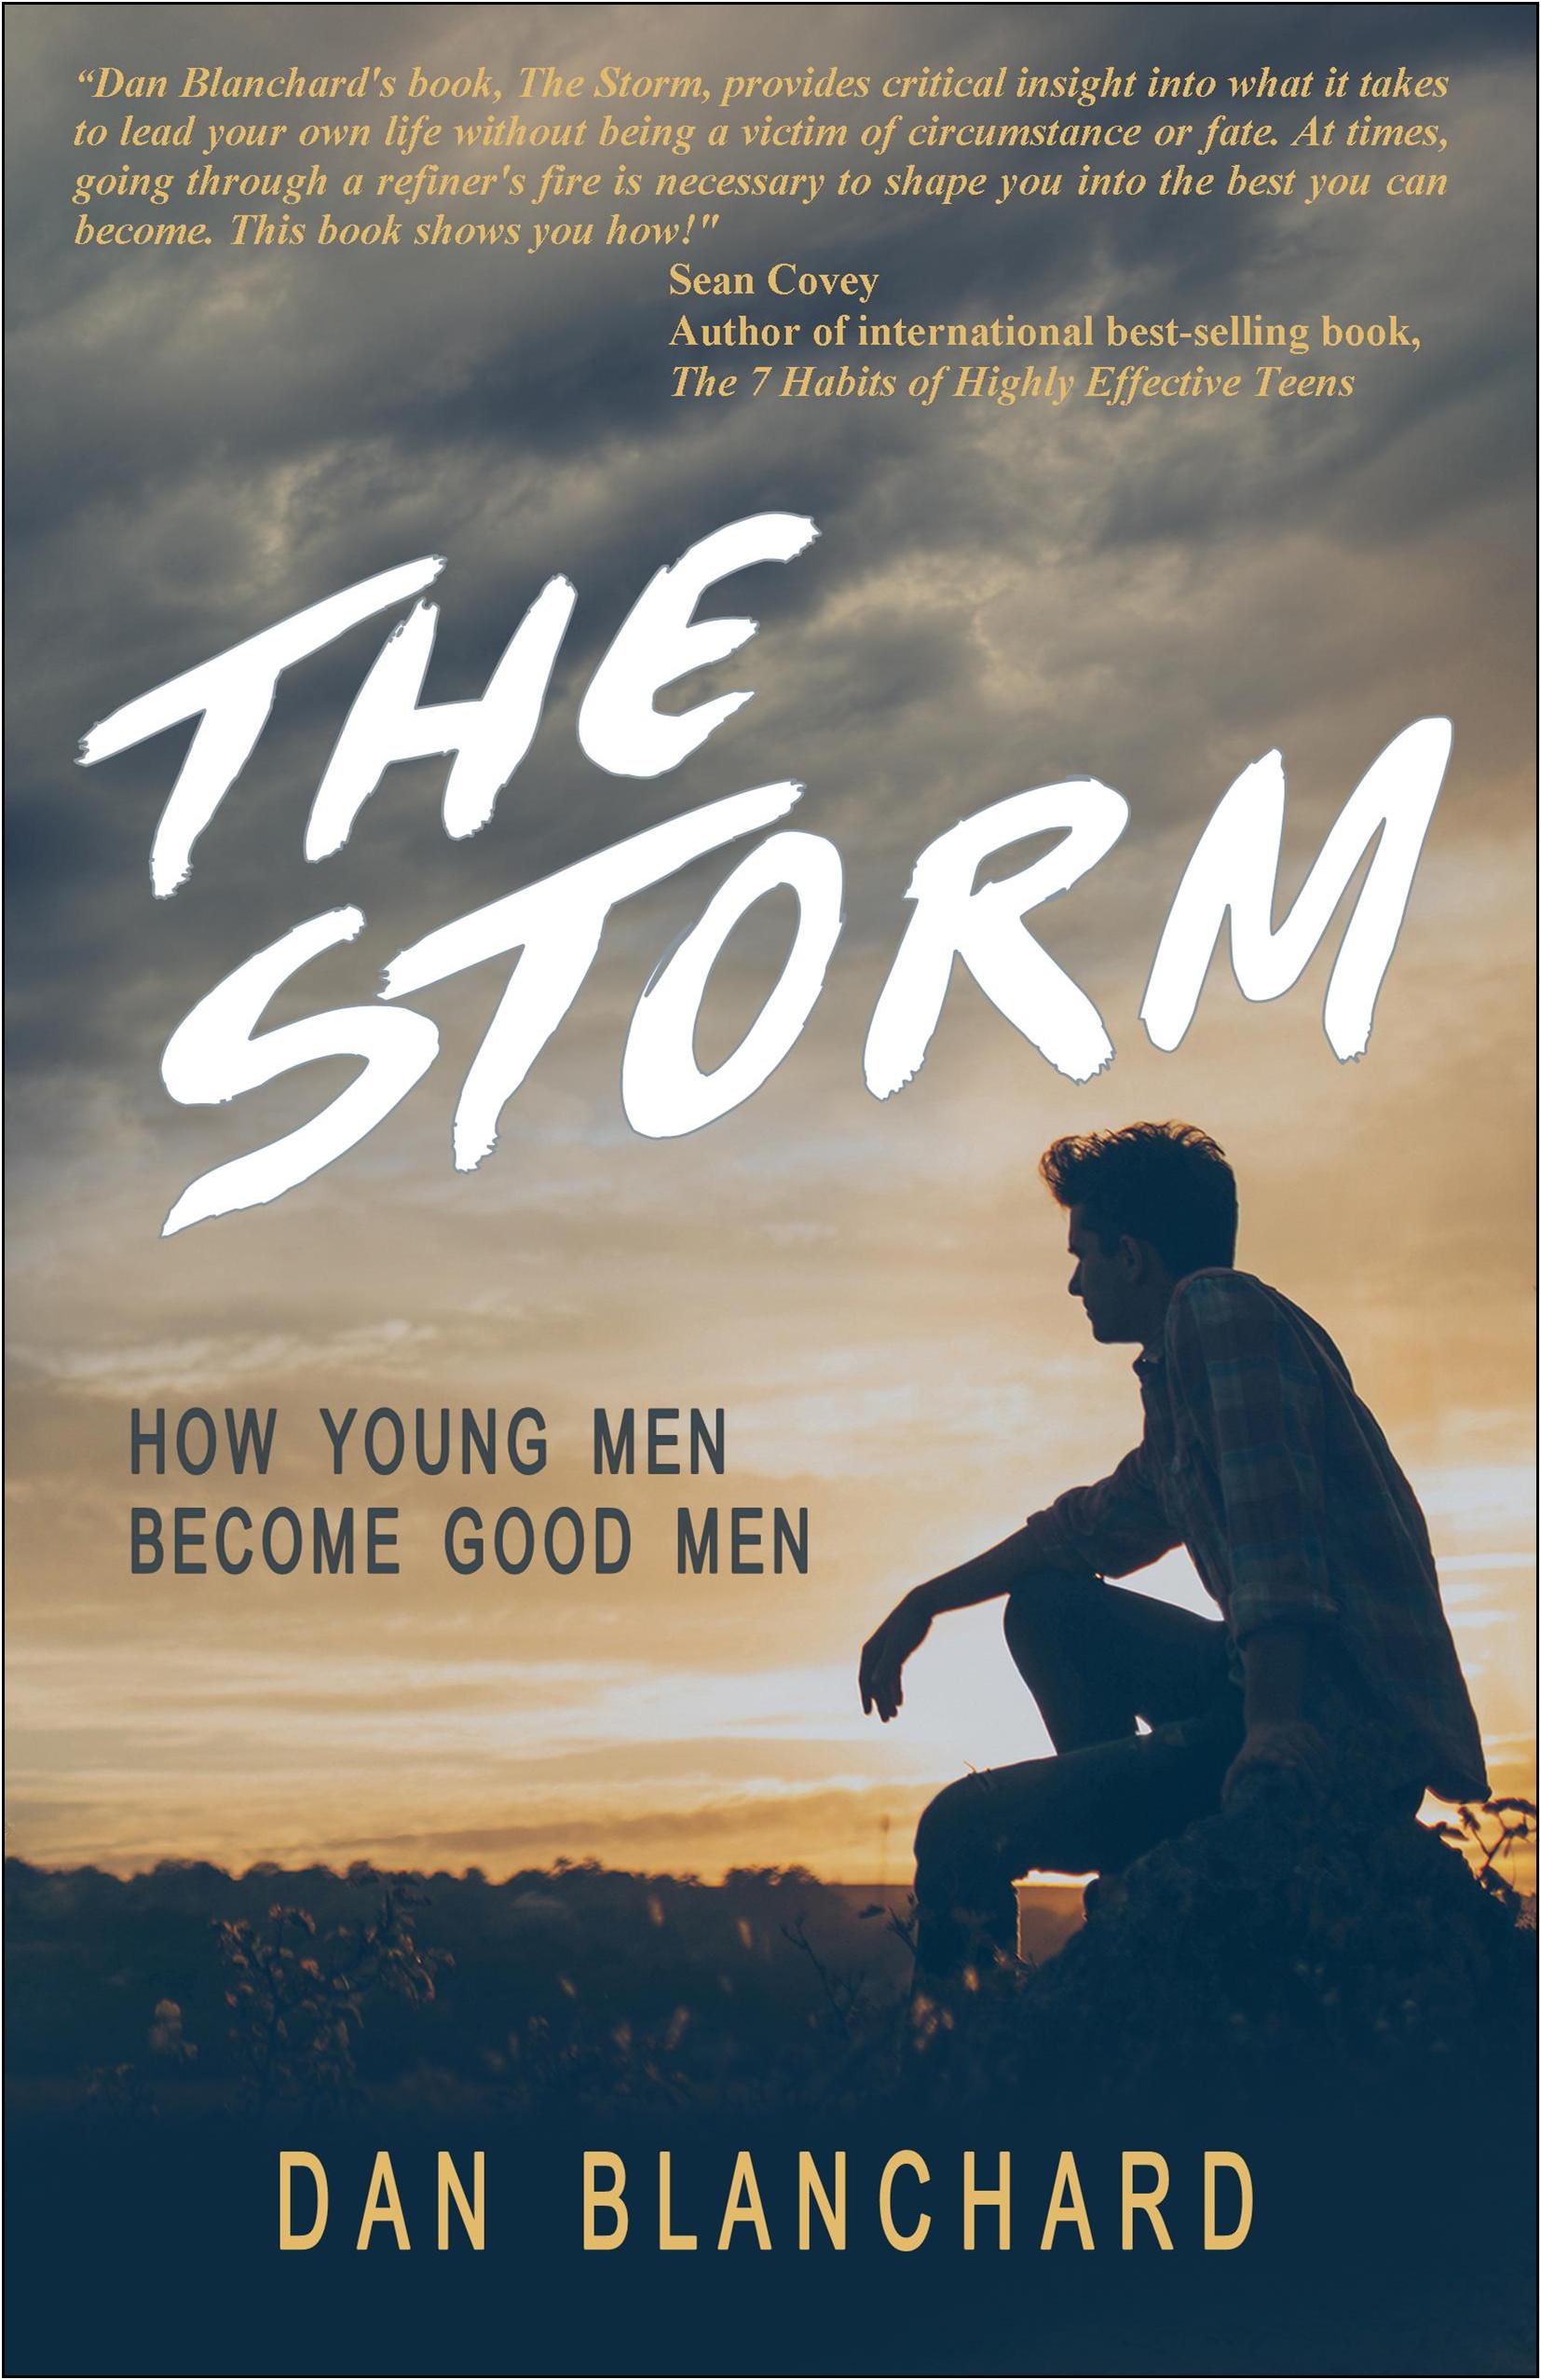 FREE: The Storm: How Young Men Become Good Men by Dan Blanchard